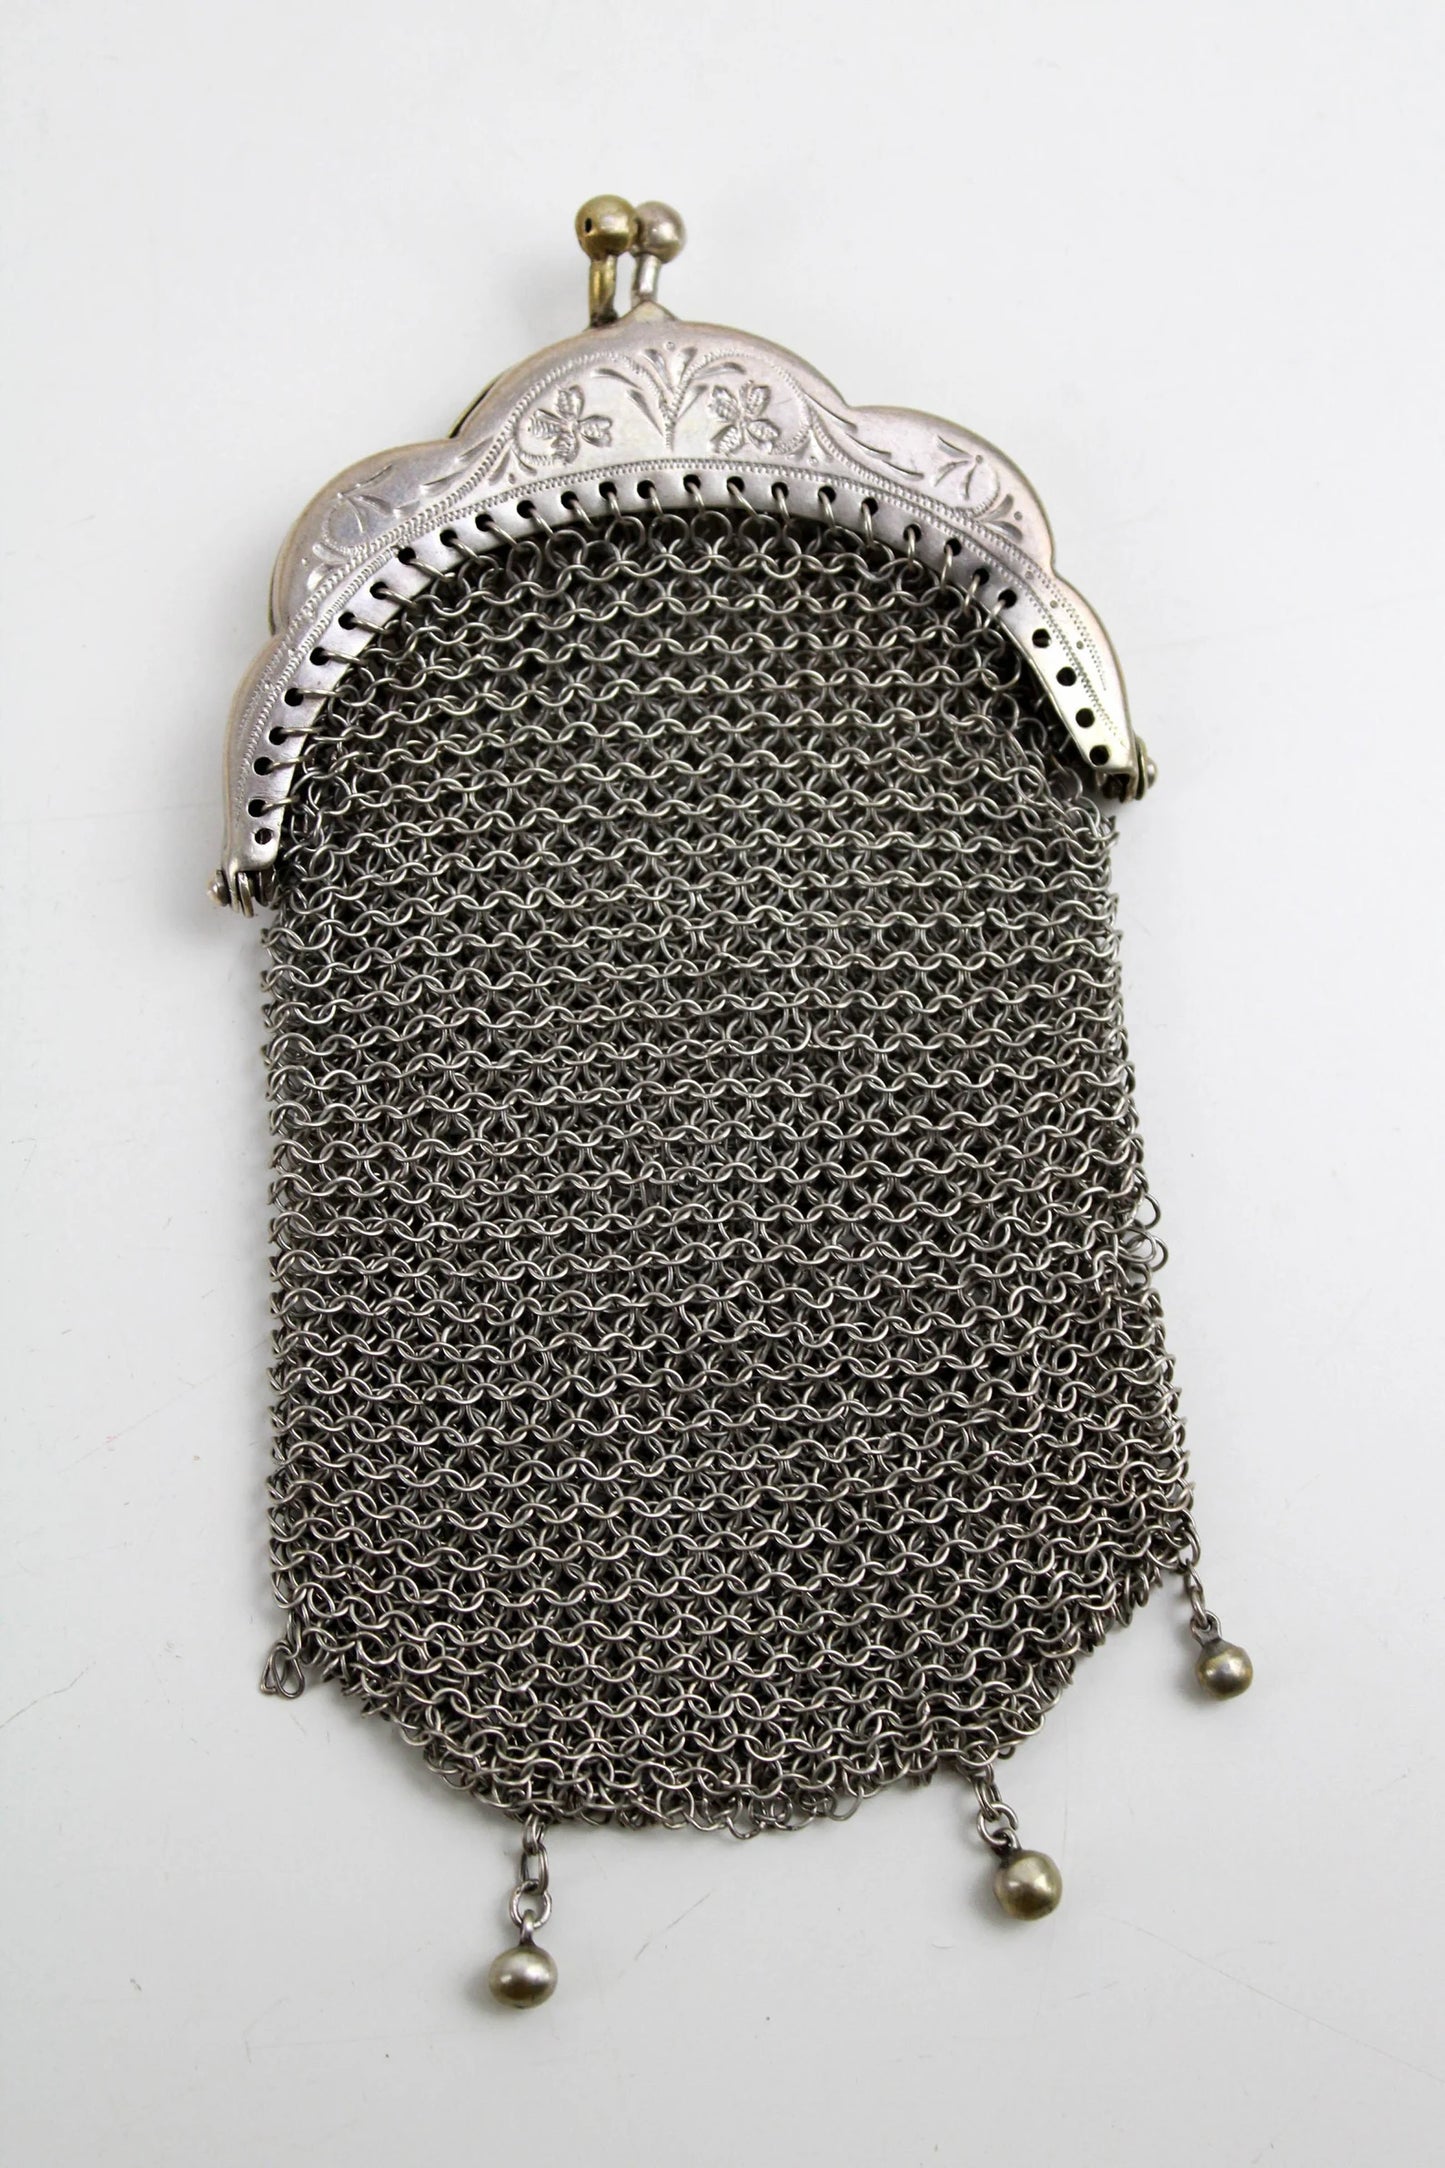 Antique Victorian Chainmail Coin Purse, Two Sections, Silver Tone Metal, Kiss Clasp, 1900s Mesh Metal Pouch